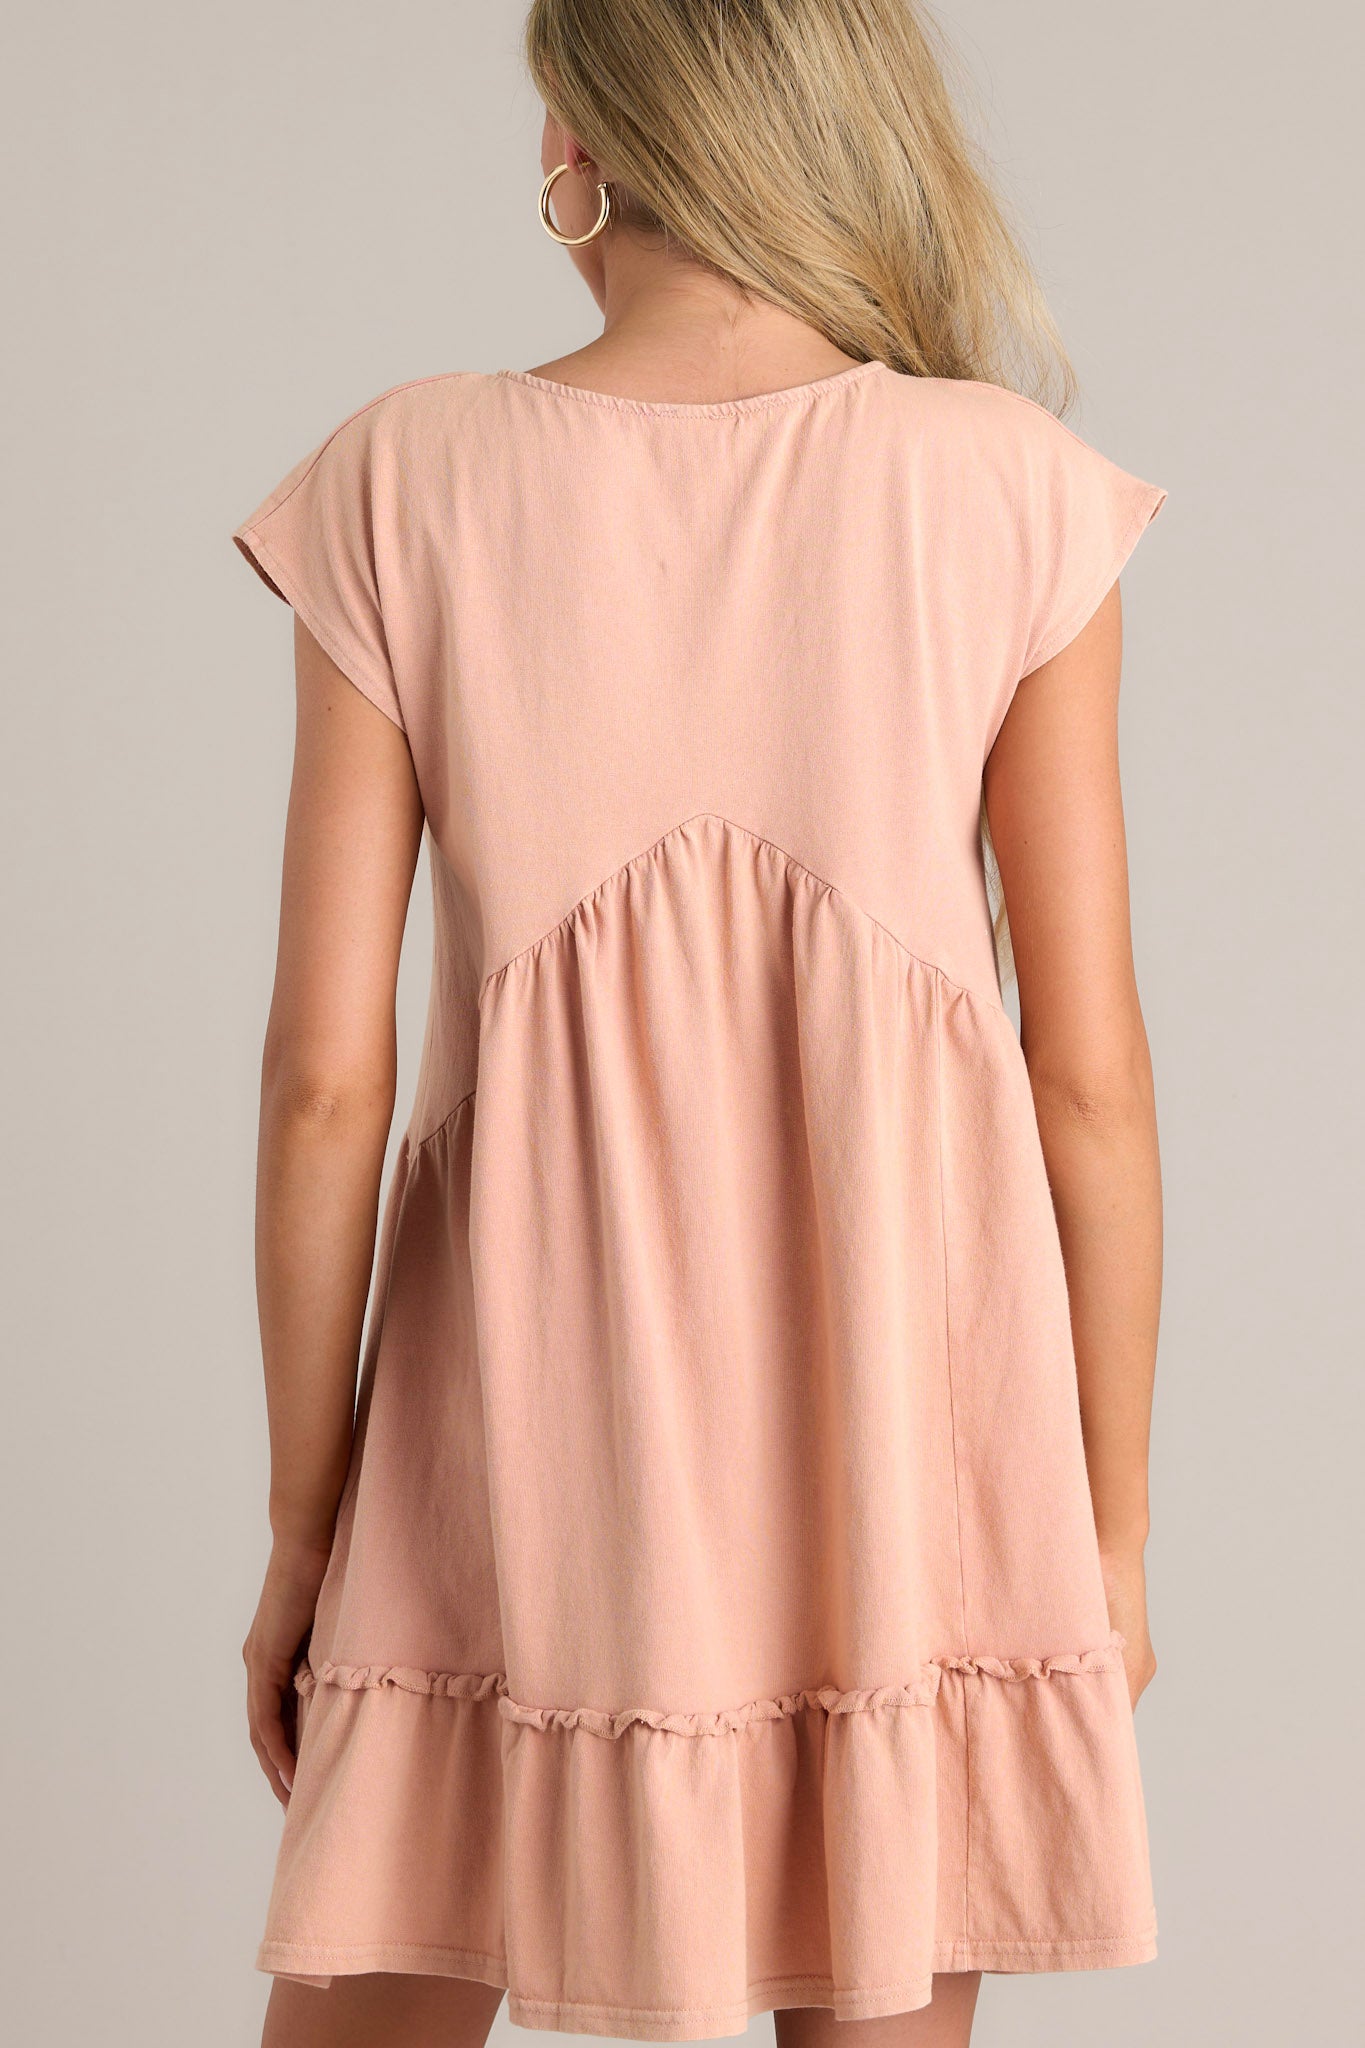 Back view of a peach mini dress showcasing the short cap sleeves and flowing silhouette.